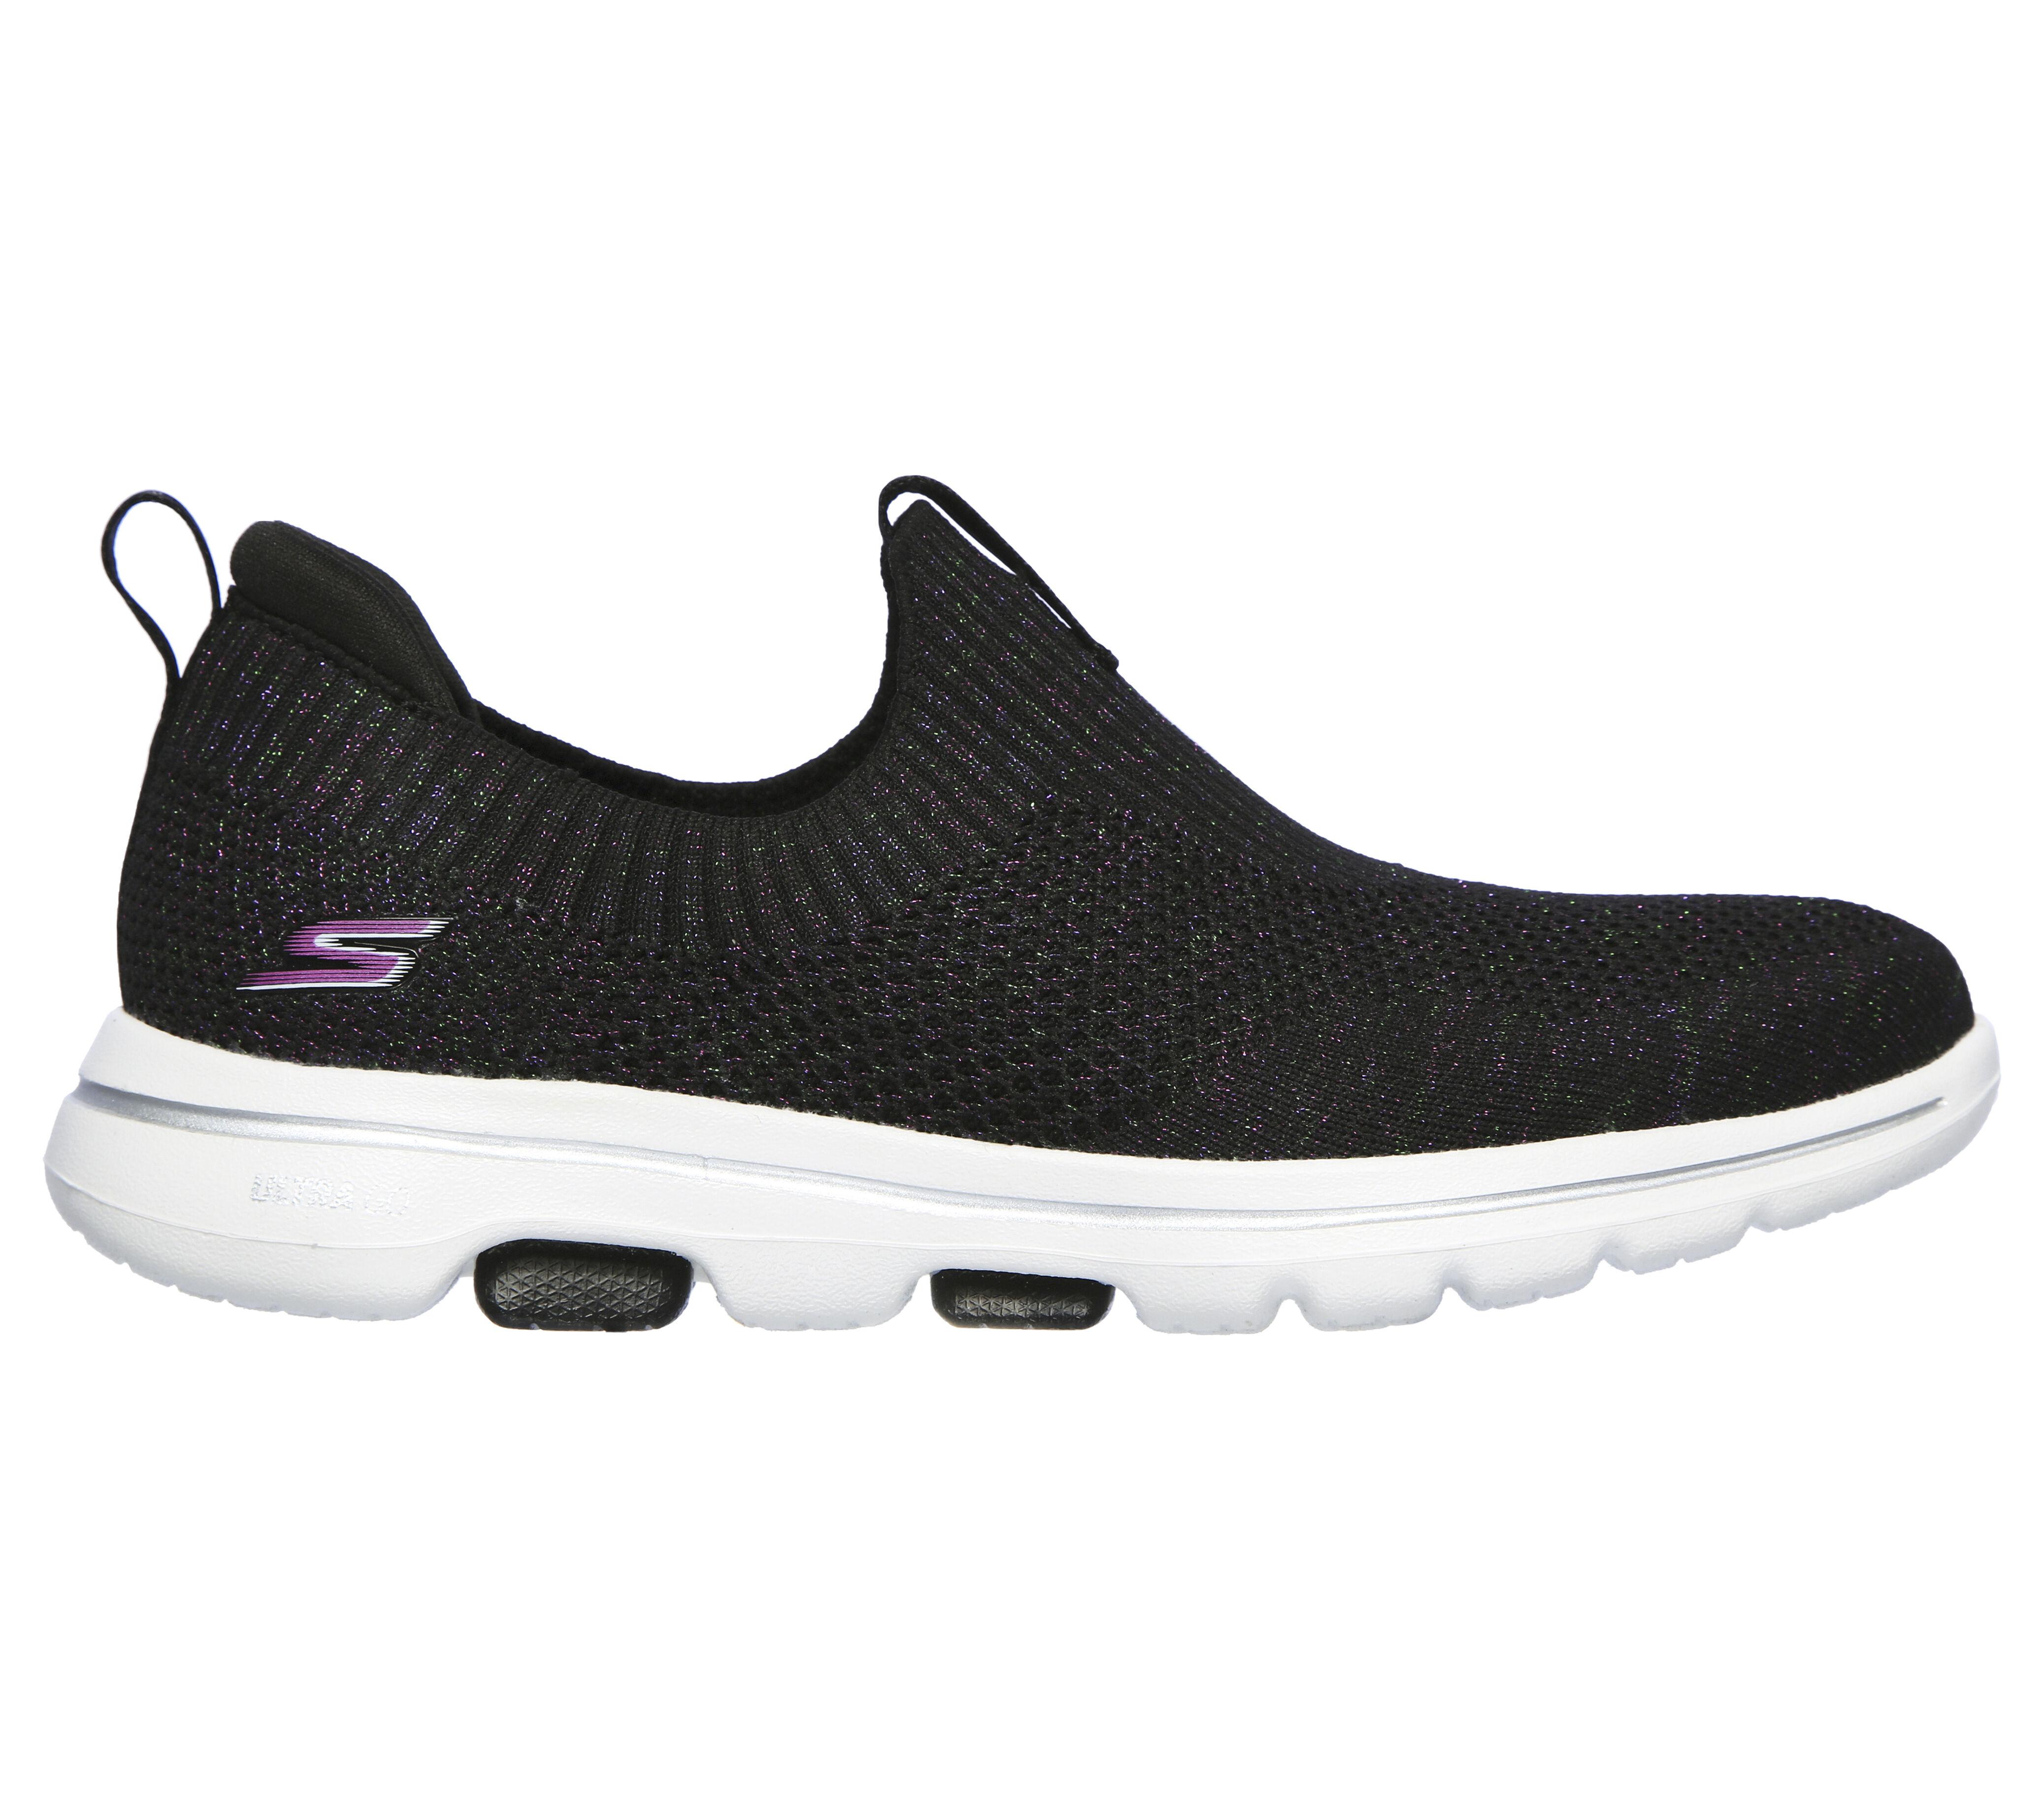 skechers ladies you knit slip on shoes